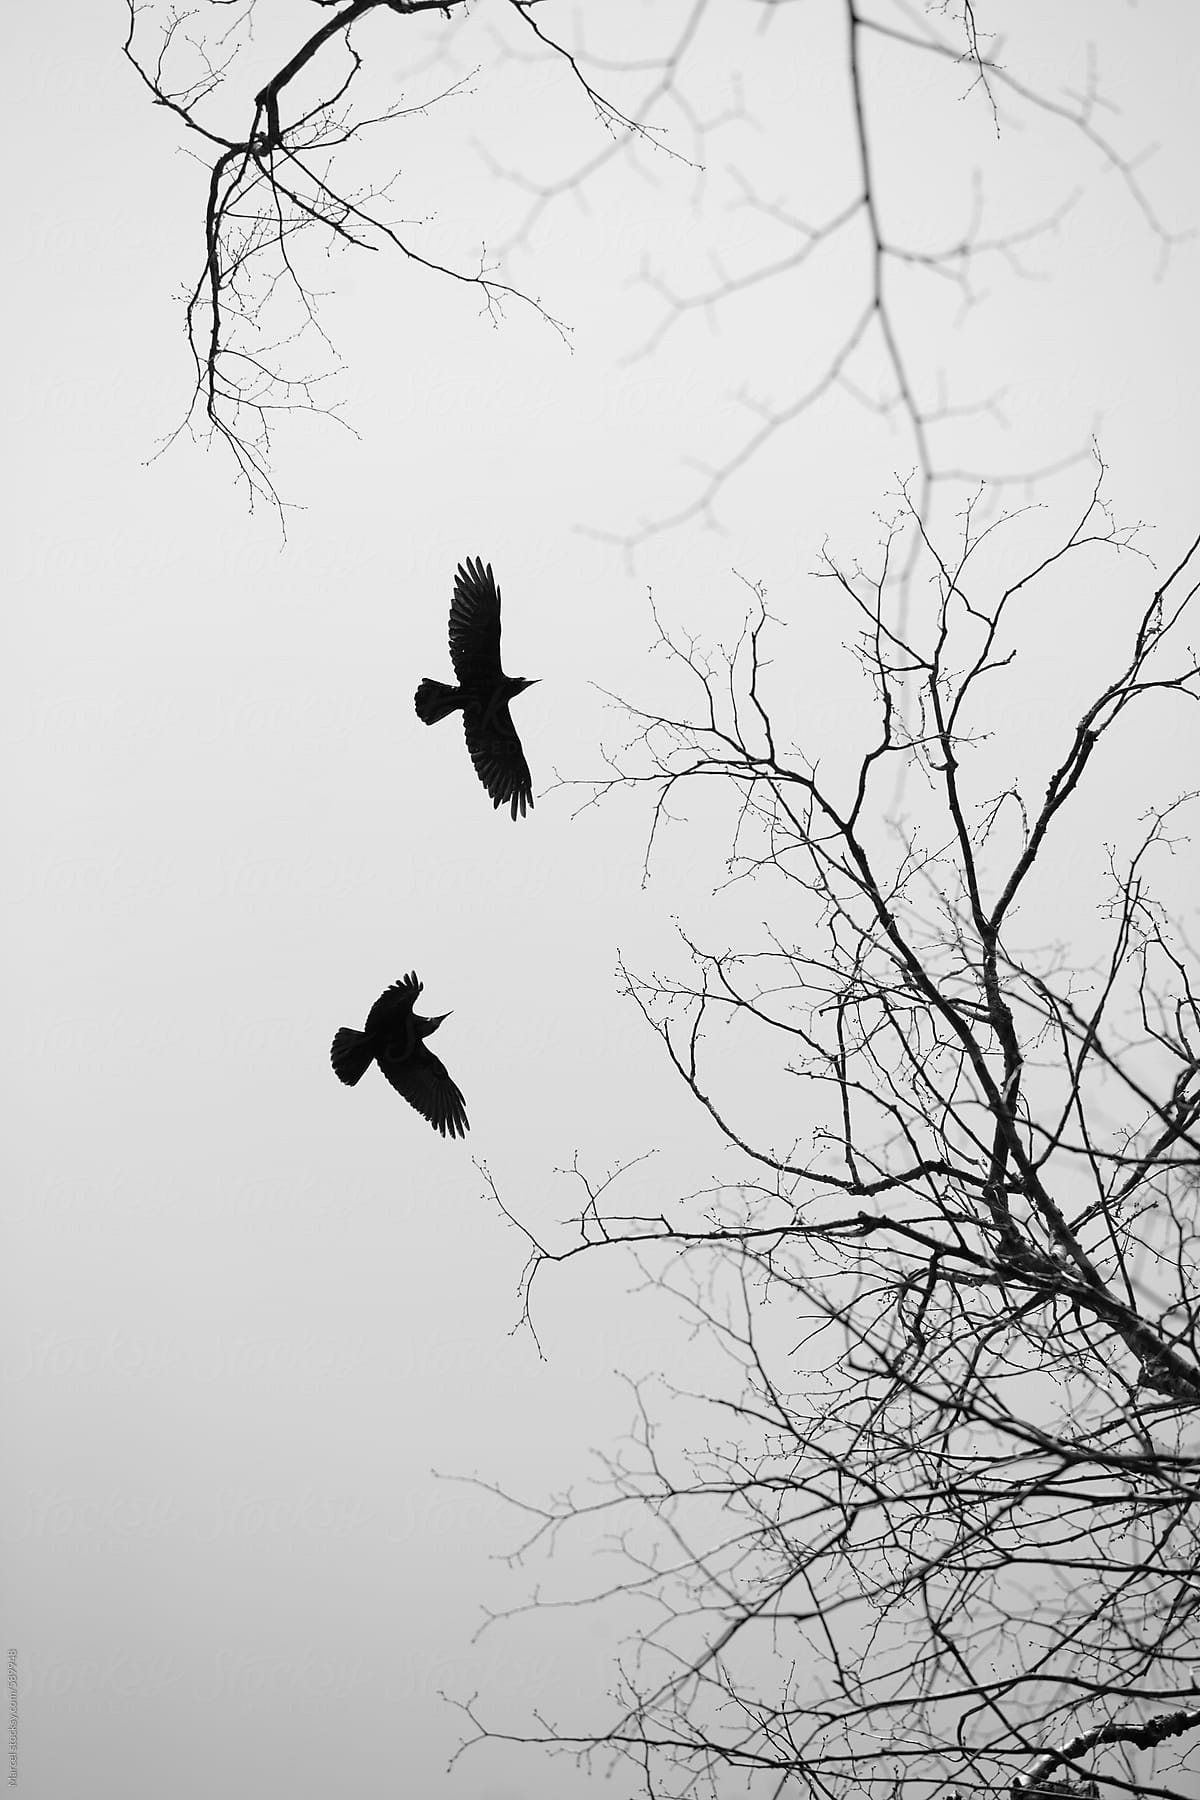 Two crows flying between treetops